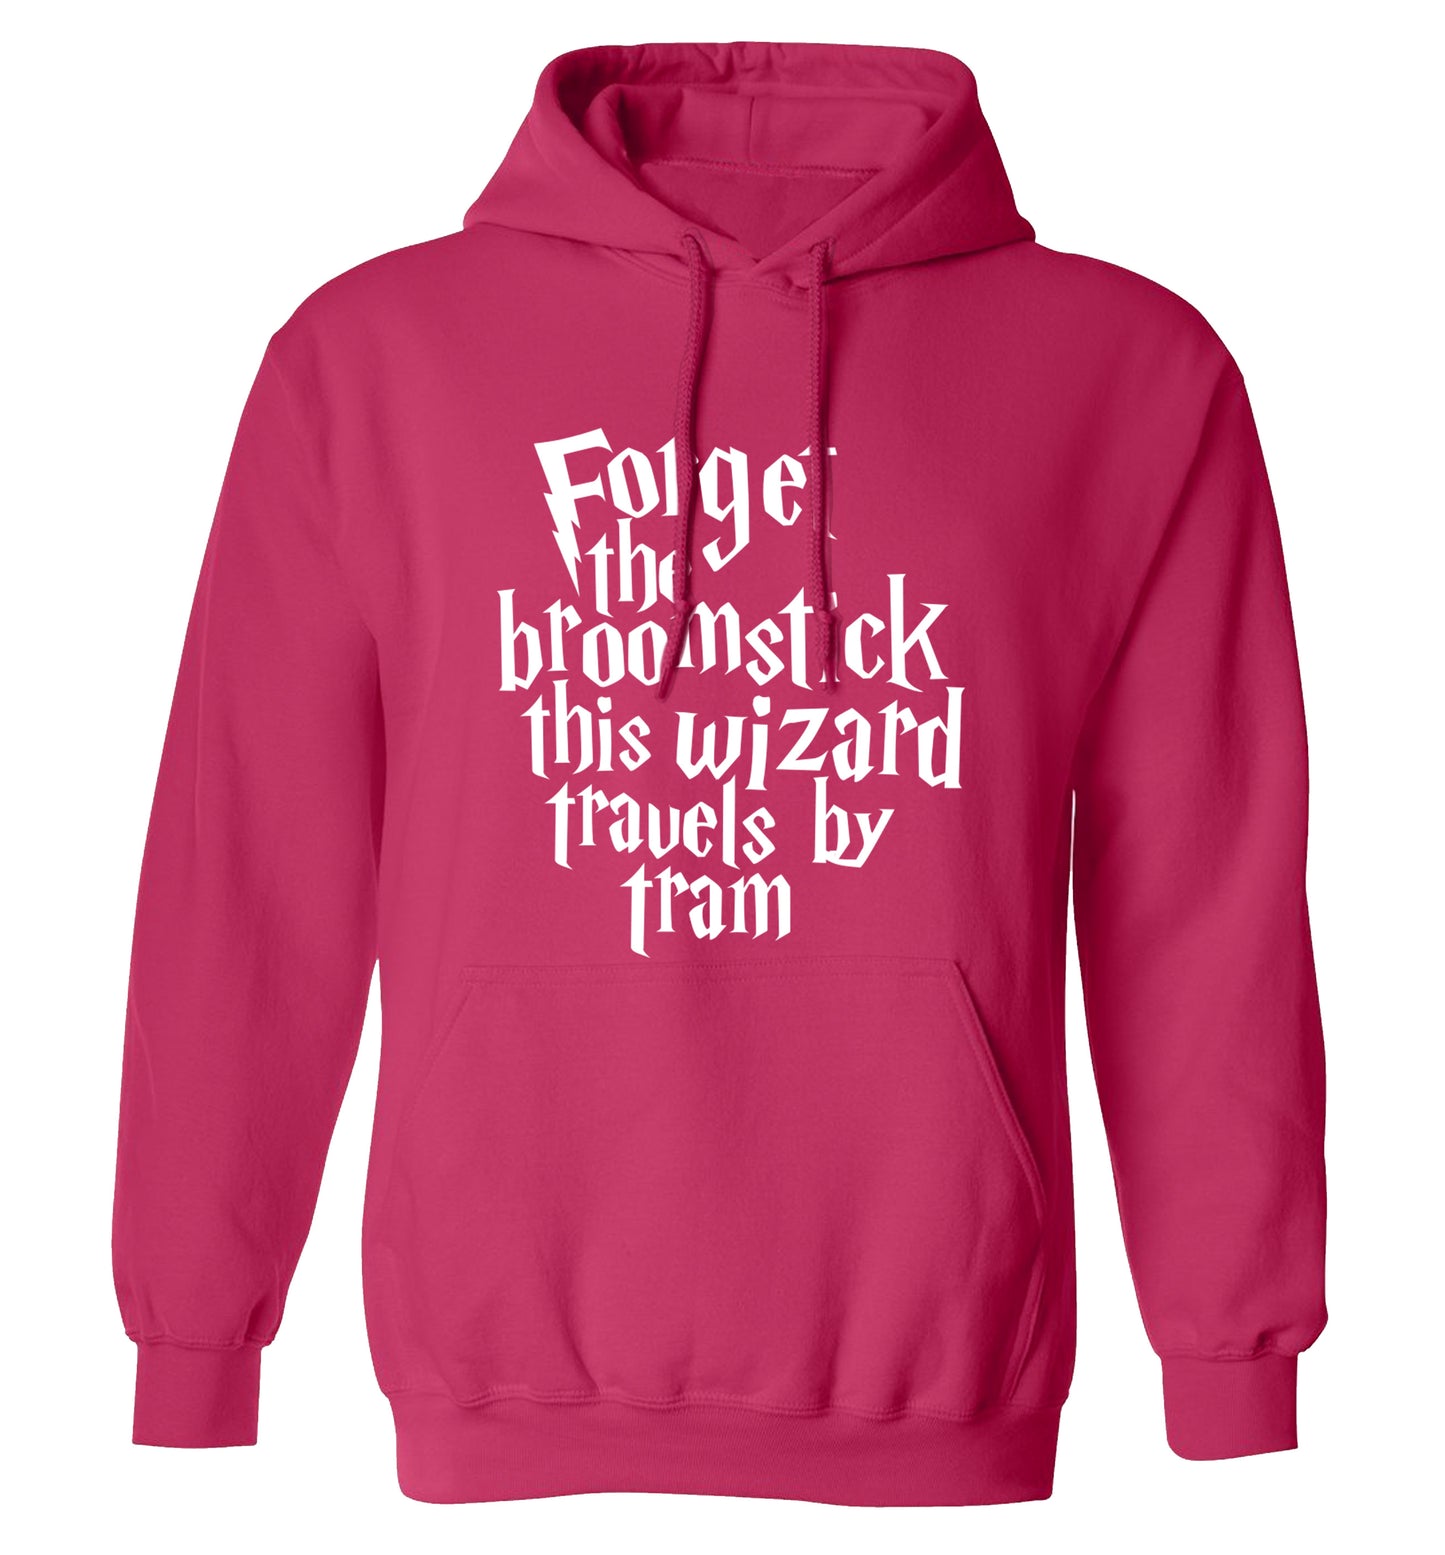 Forget the broomstick this wizard travels by tram adults unisexpink hoodie 2XL